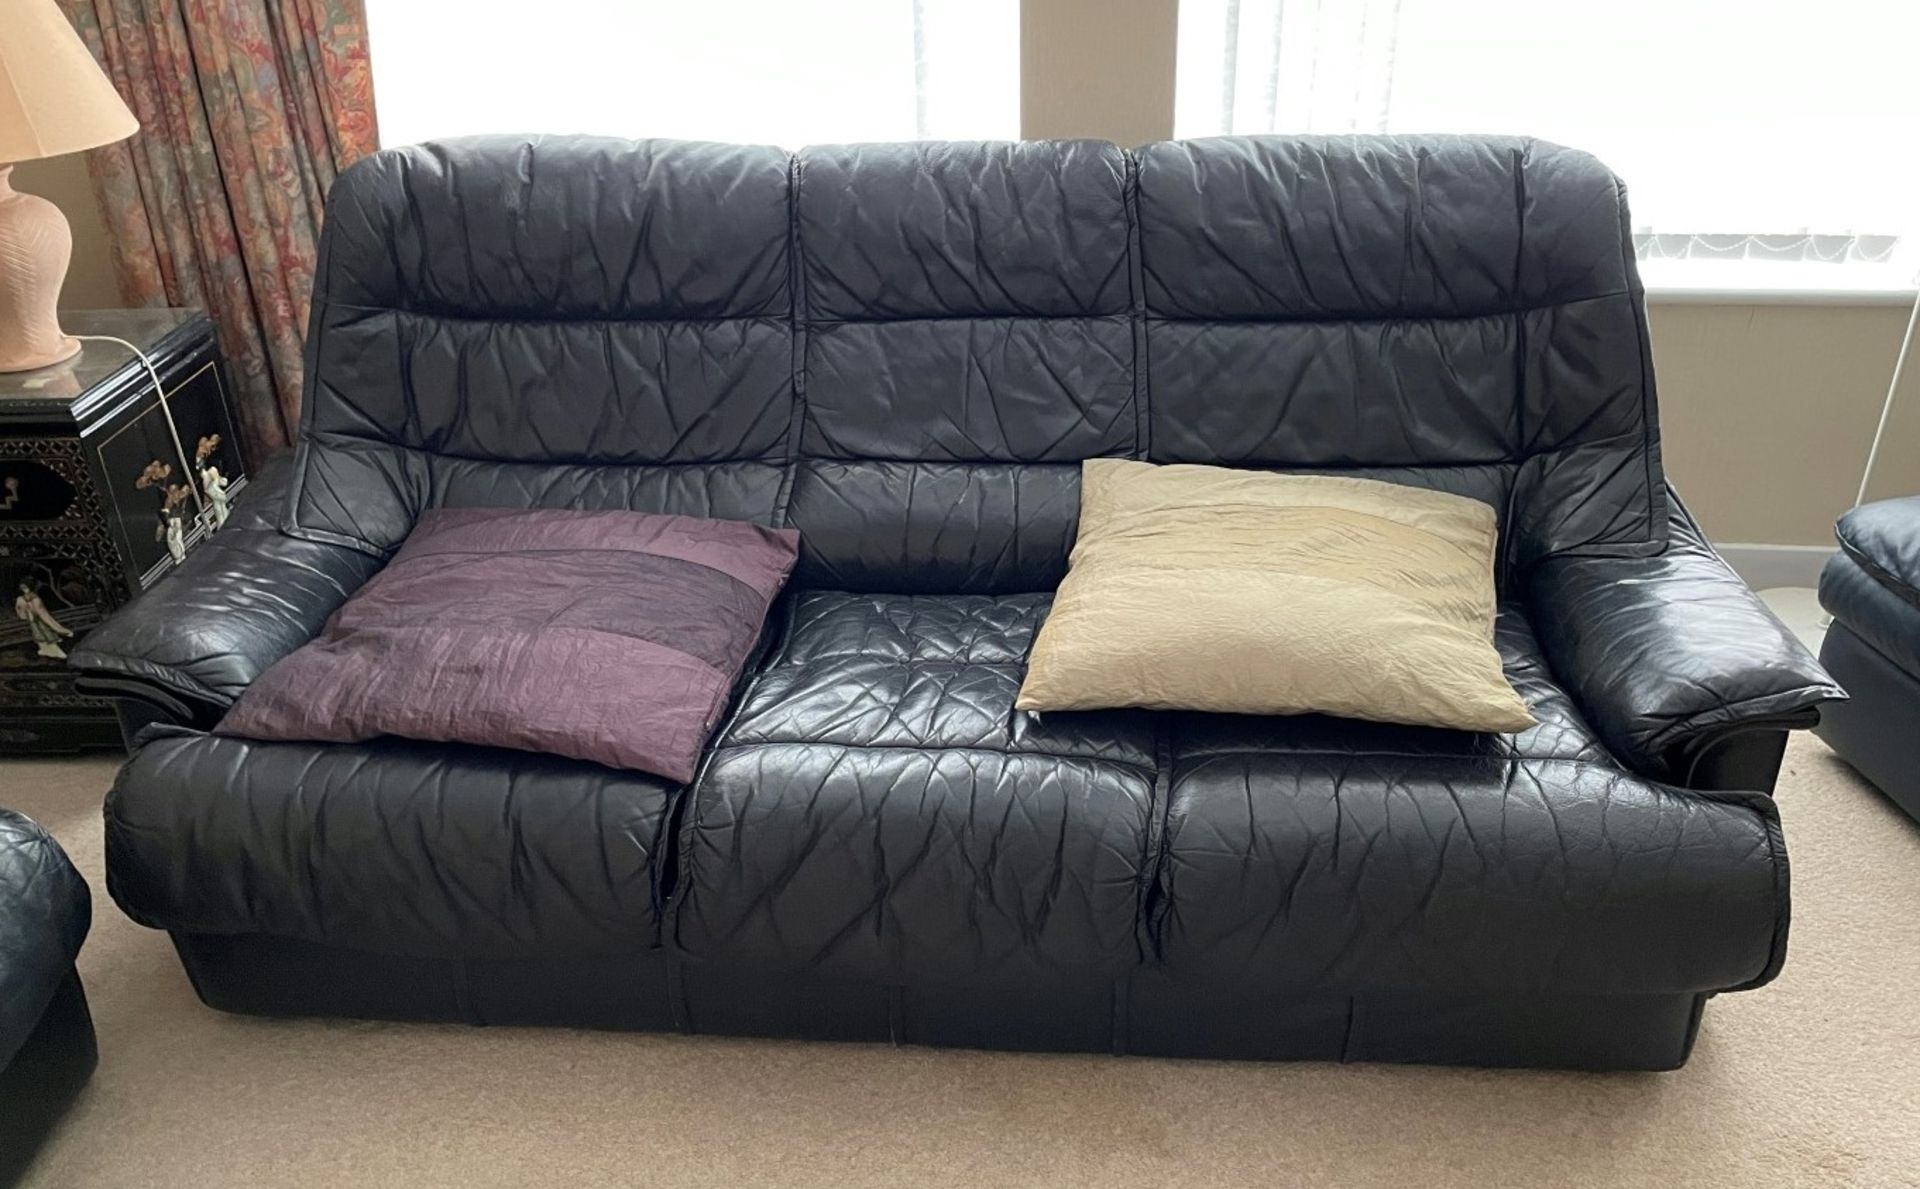 3-Piece Sofa Set In Black - Includes 1 x 3-Seater Sofa, 1 x 2-Seater Sofa & 1 x Footstool - From - Image 2 of 11